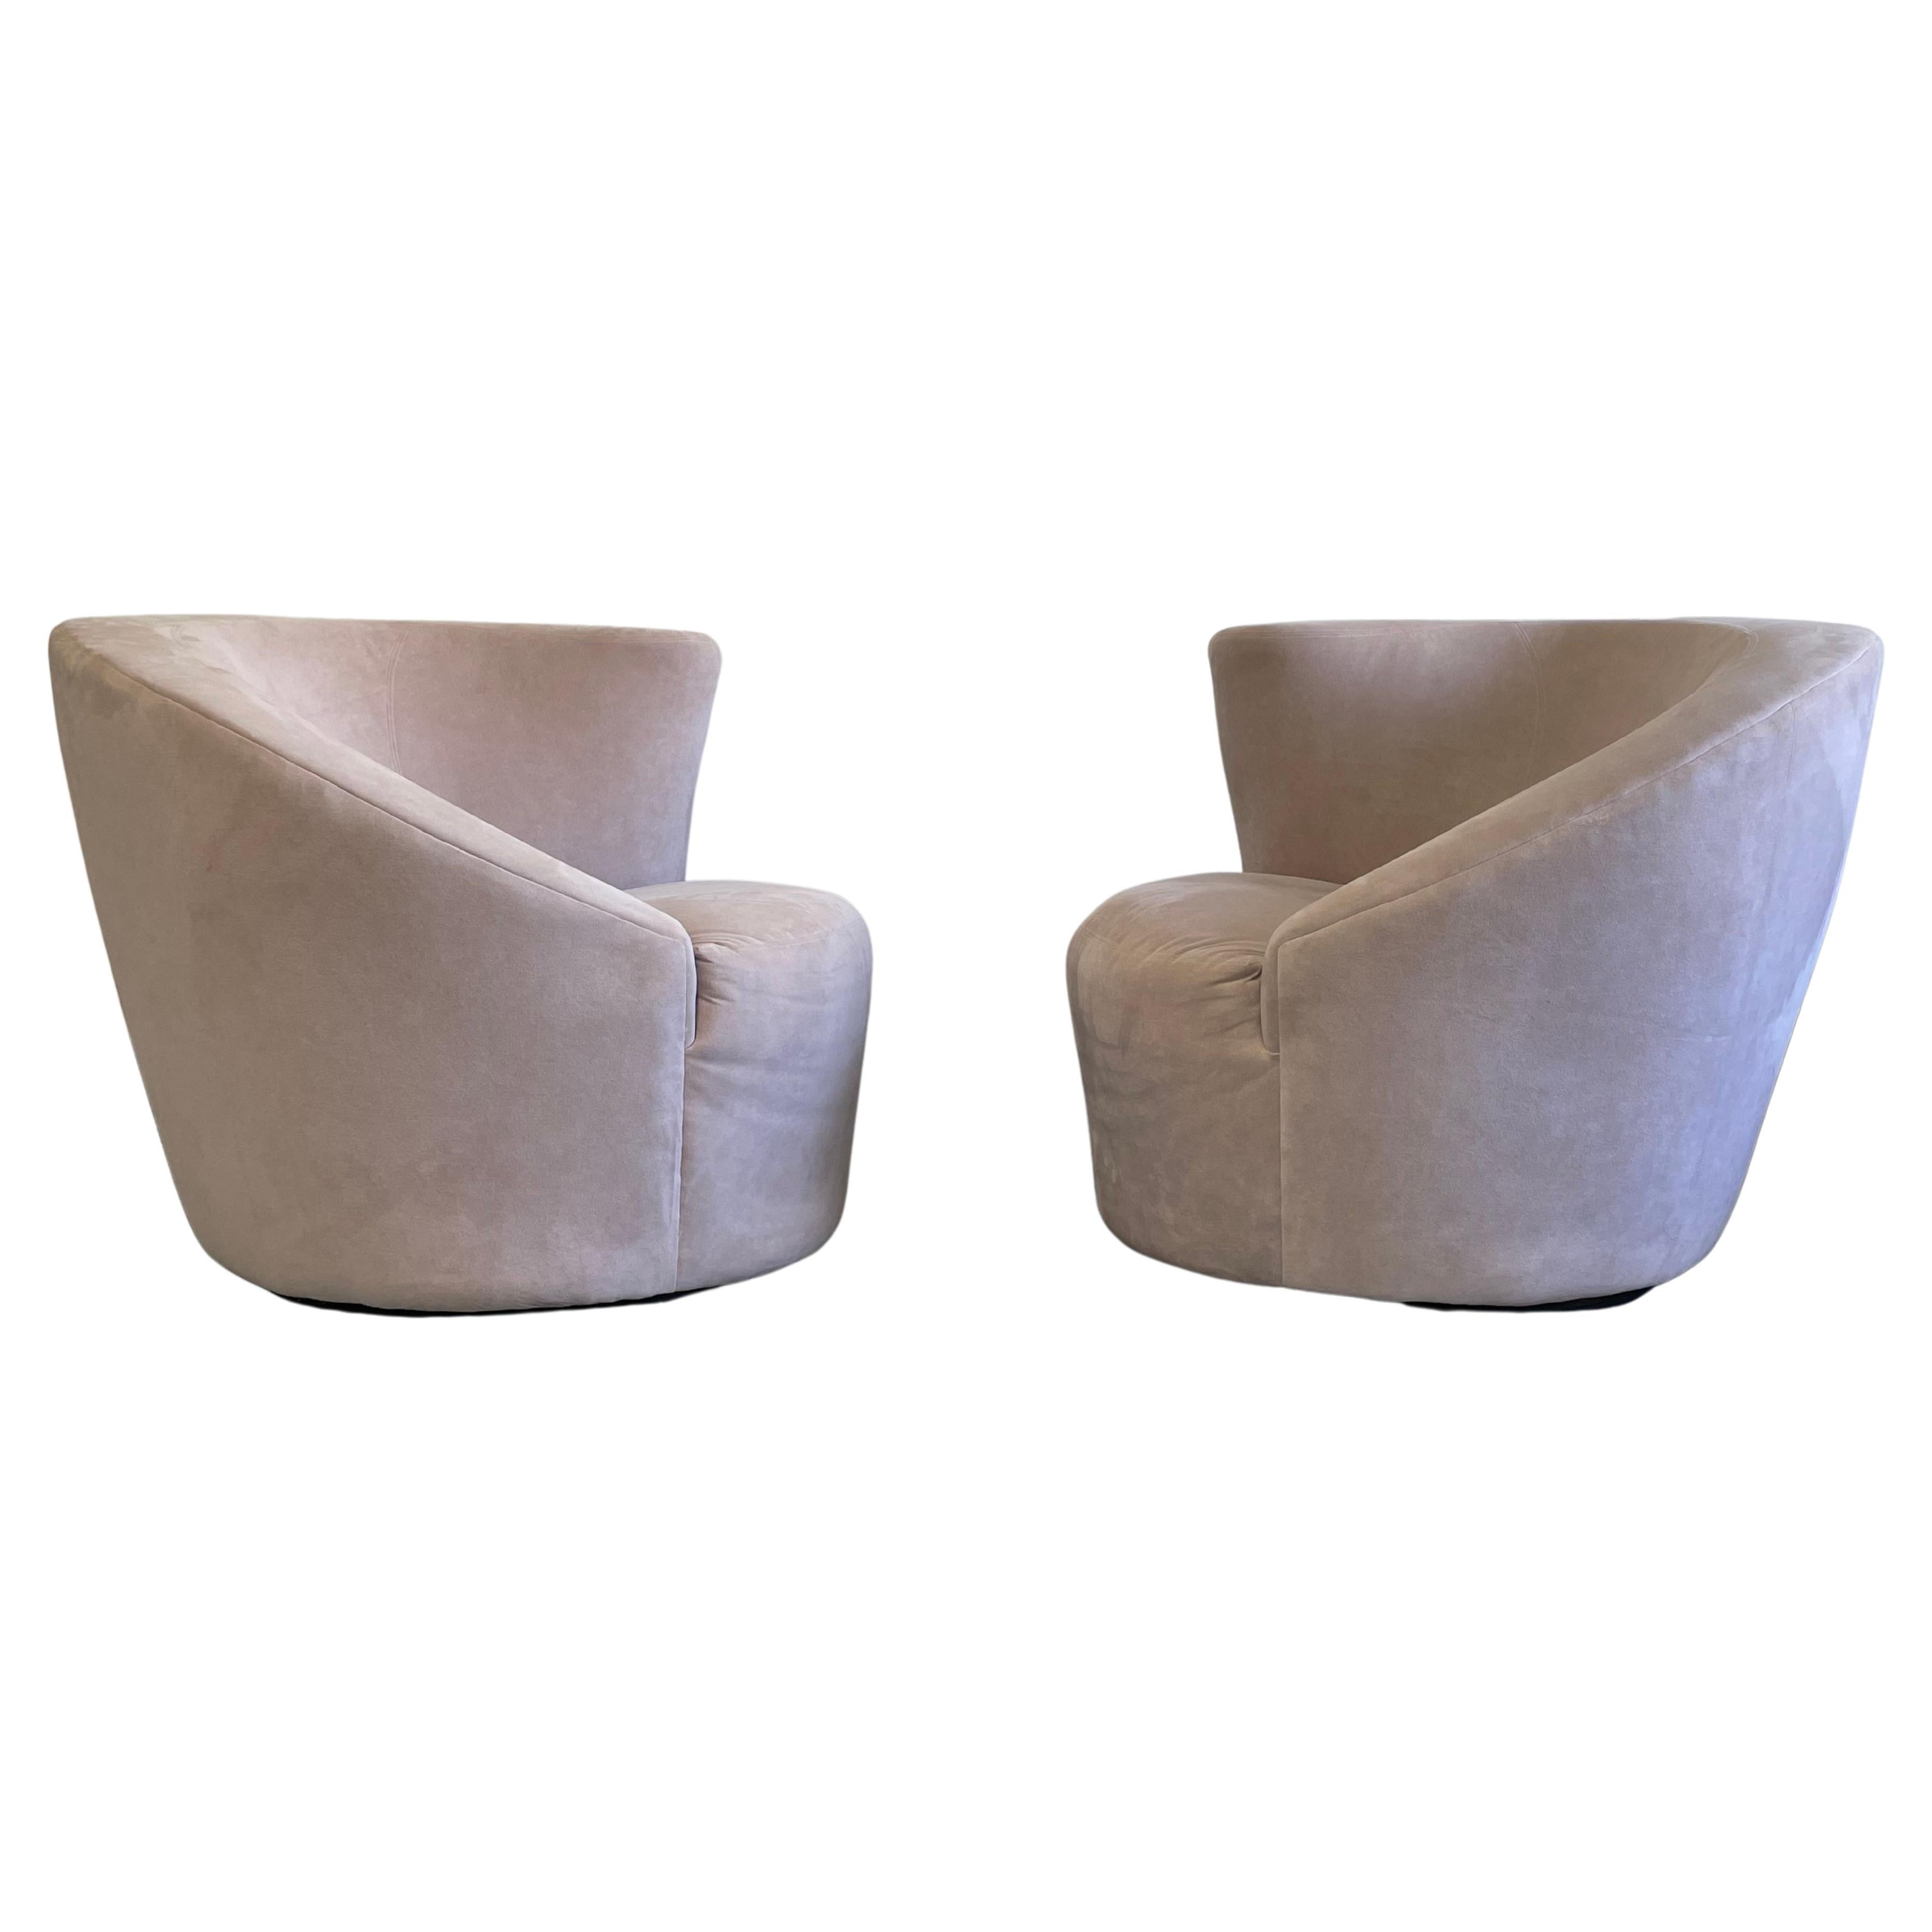 Corkscrew or Nautilus Swivel Chairs by Directional